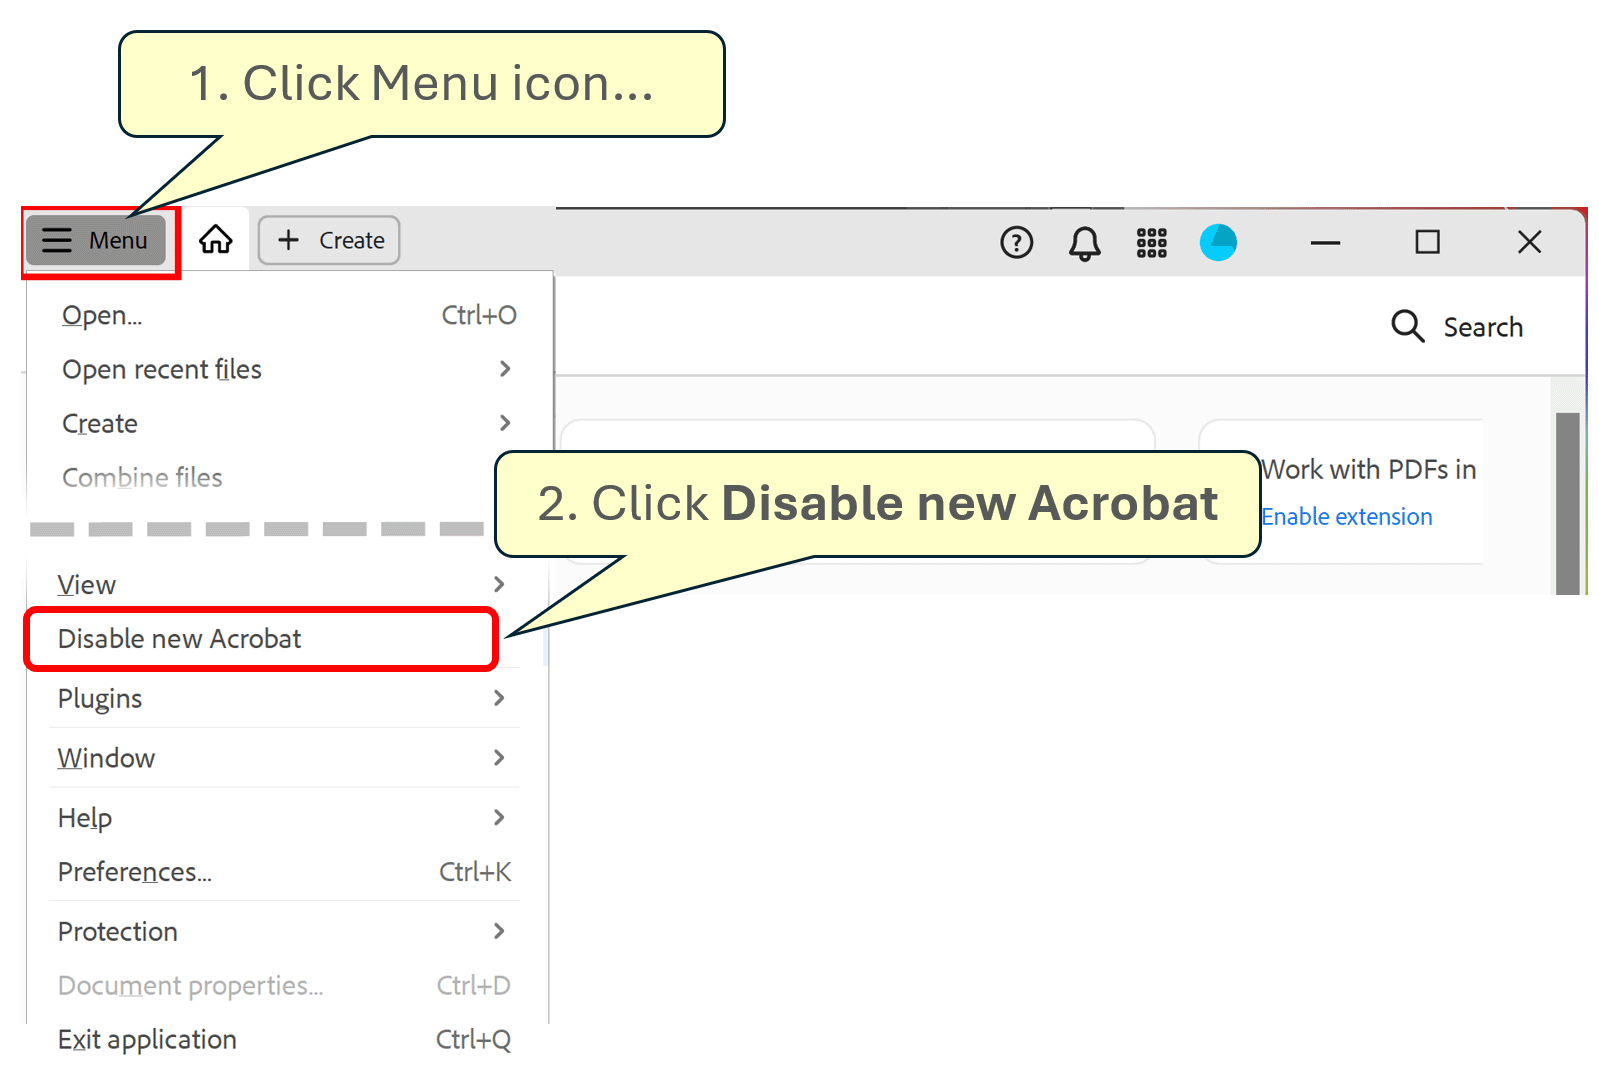 How to disable new Adobe Acrobat interface